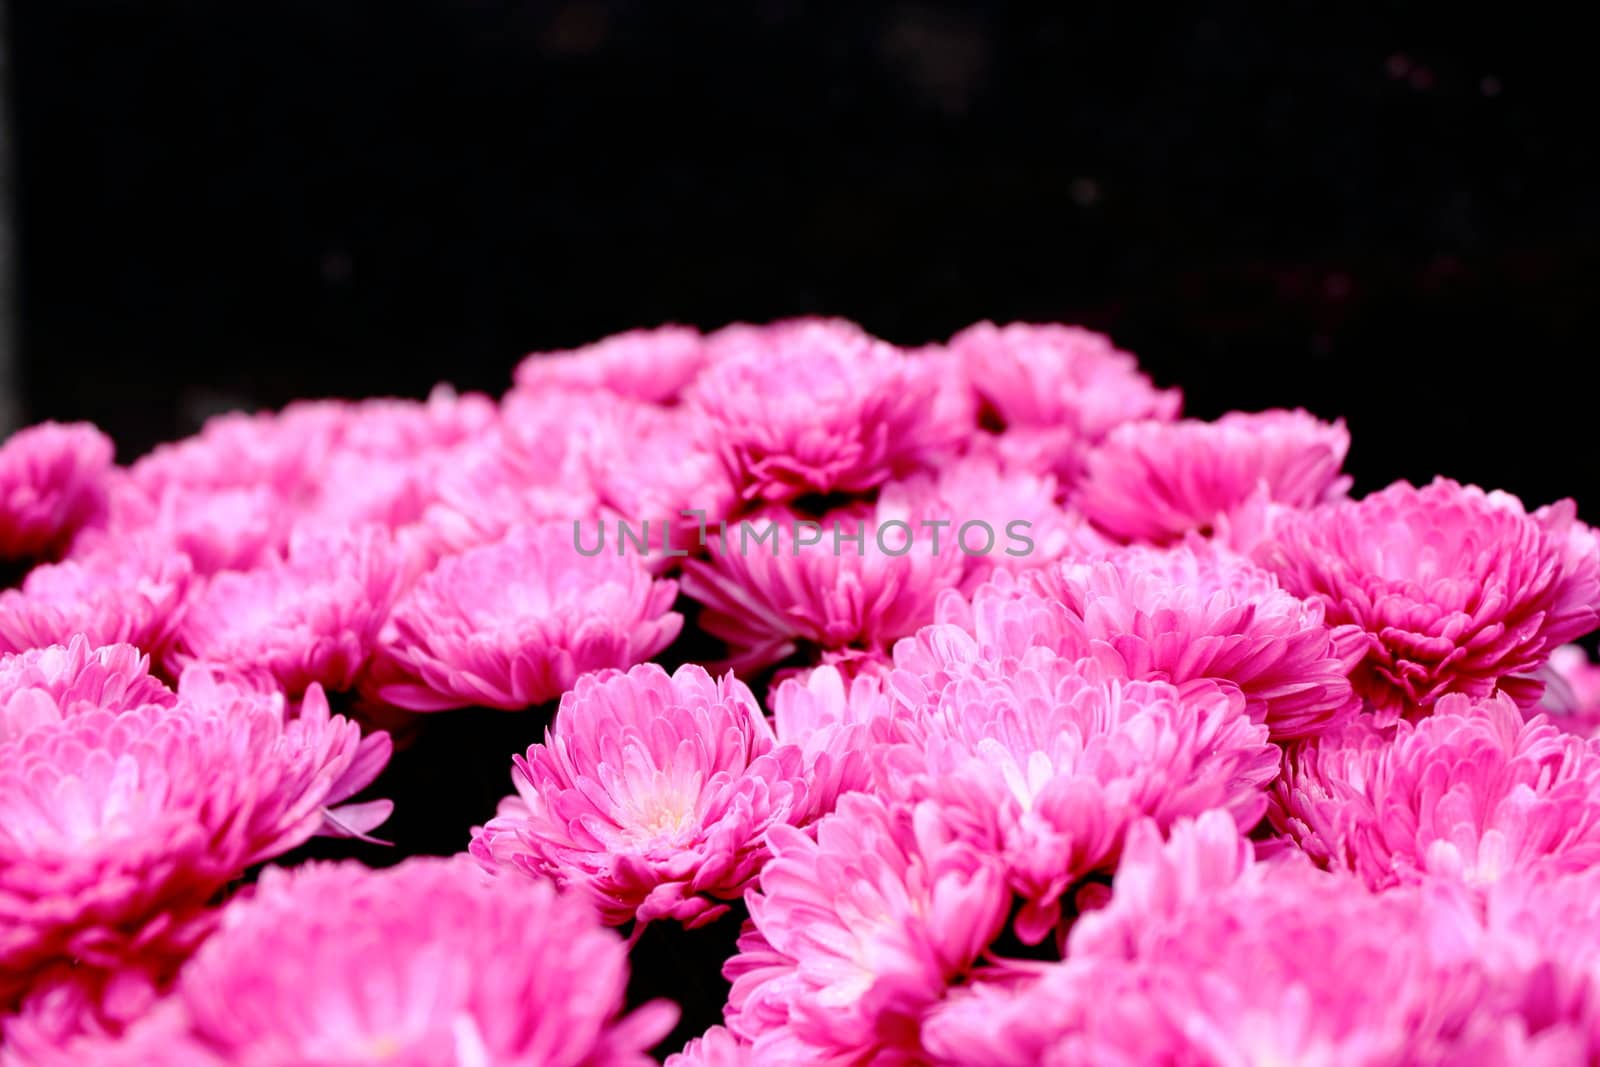 bouquet of beautiful pink chrysanthemum - the perfect gift